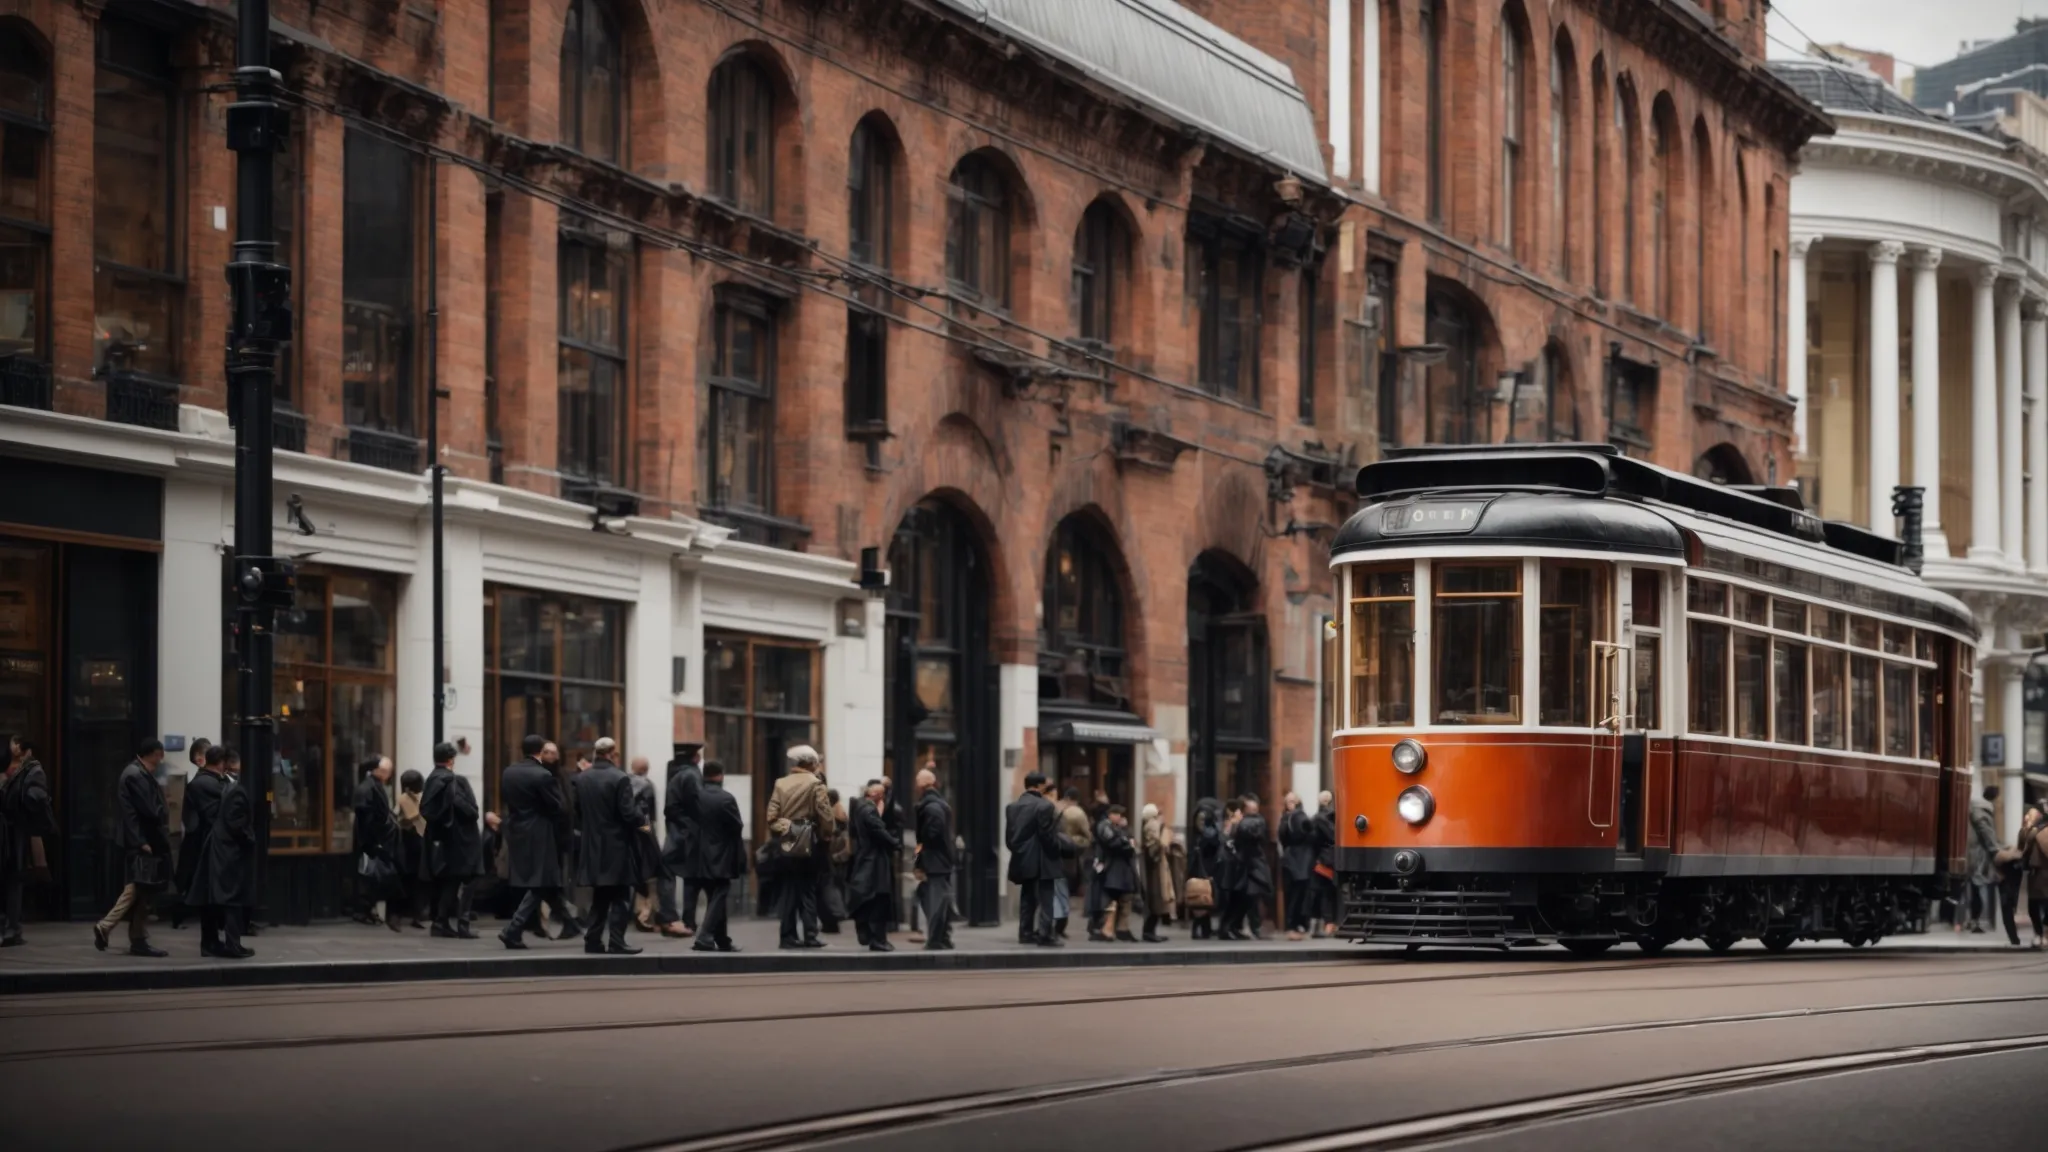 a tram glides past historic buildings on a bustling street in birmingham city centre, capturing the fusion of modern transportation and architectural heritage.